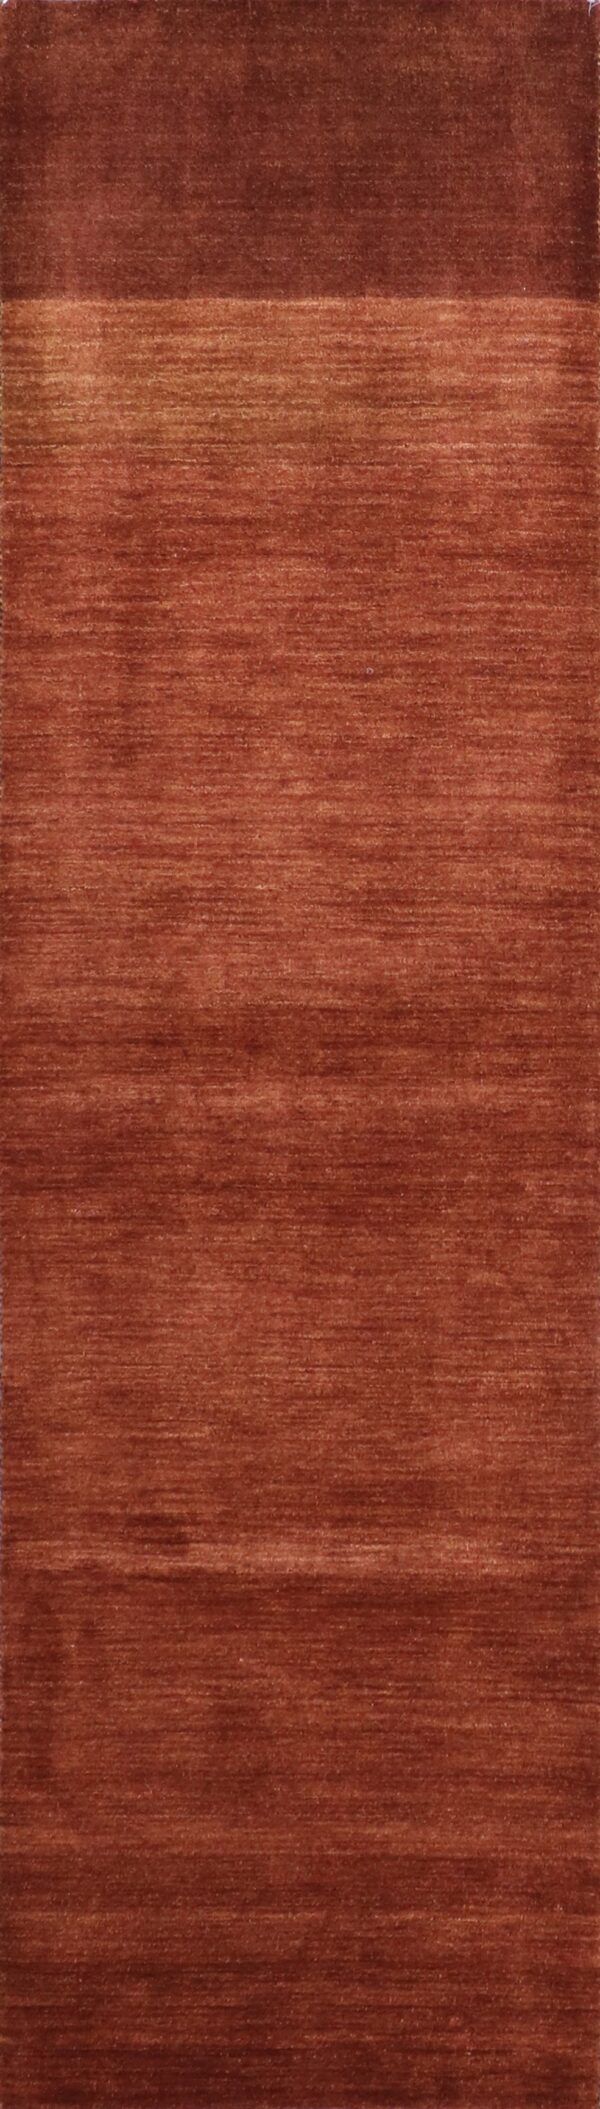 2’8”x9’9” Contemporary Brown Wool Hand-Knotted Rug - Direct Rug Import | Rugs in Chicago, Indiana,South Bend,Granger